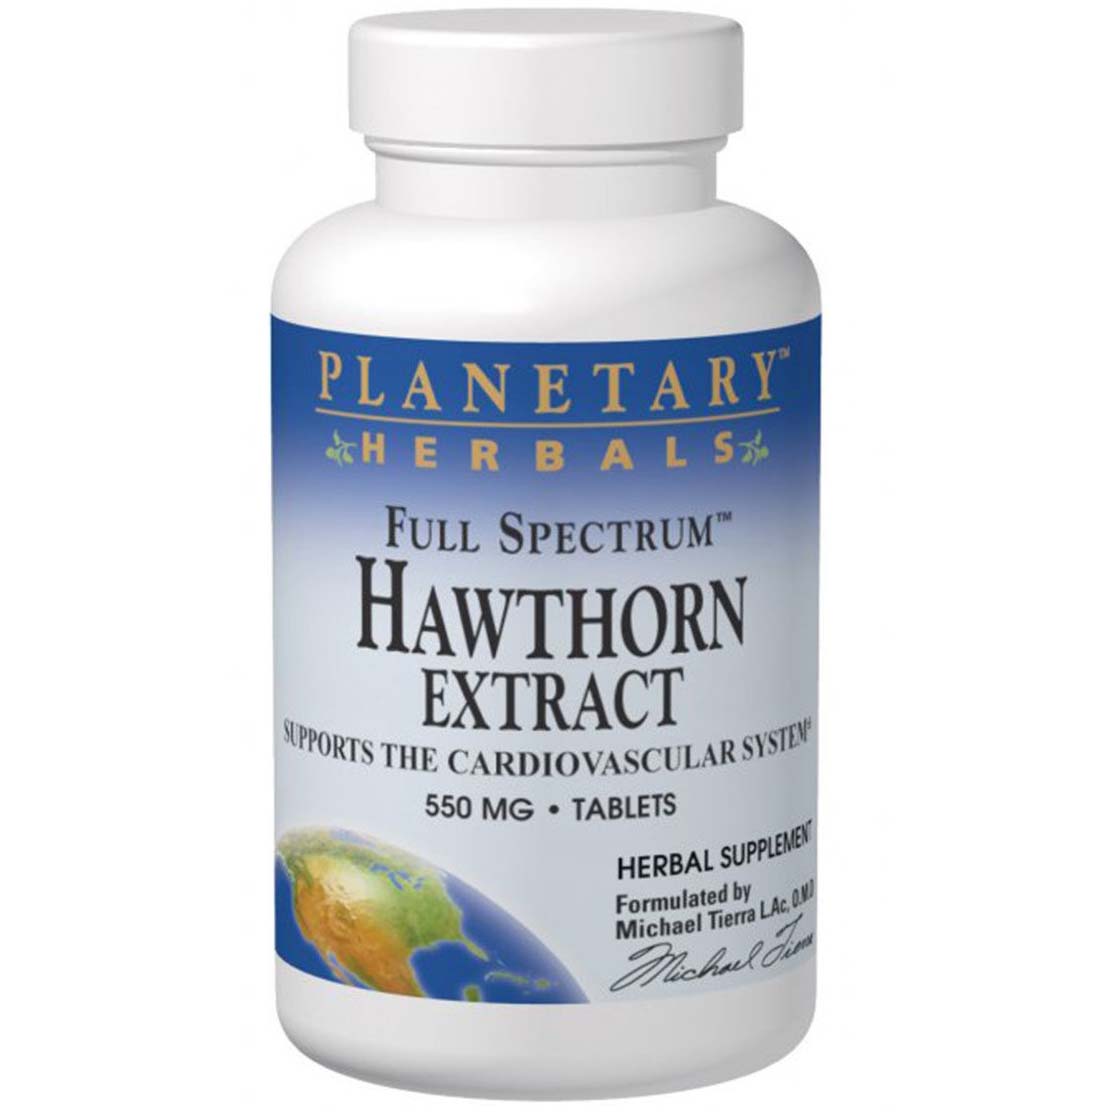 Planetary Herbals Hawthorn Extract Full Spectrum, 550 mg, 60 Tablets